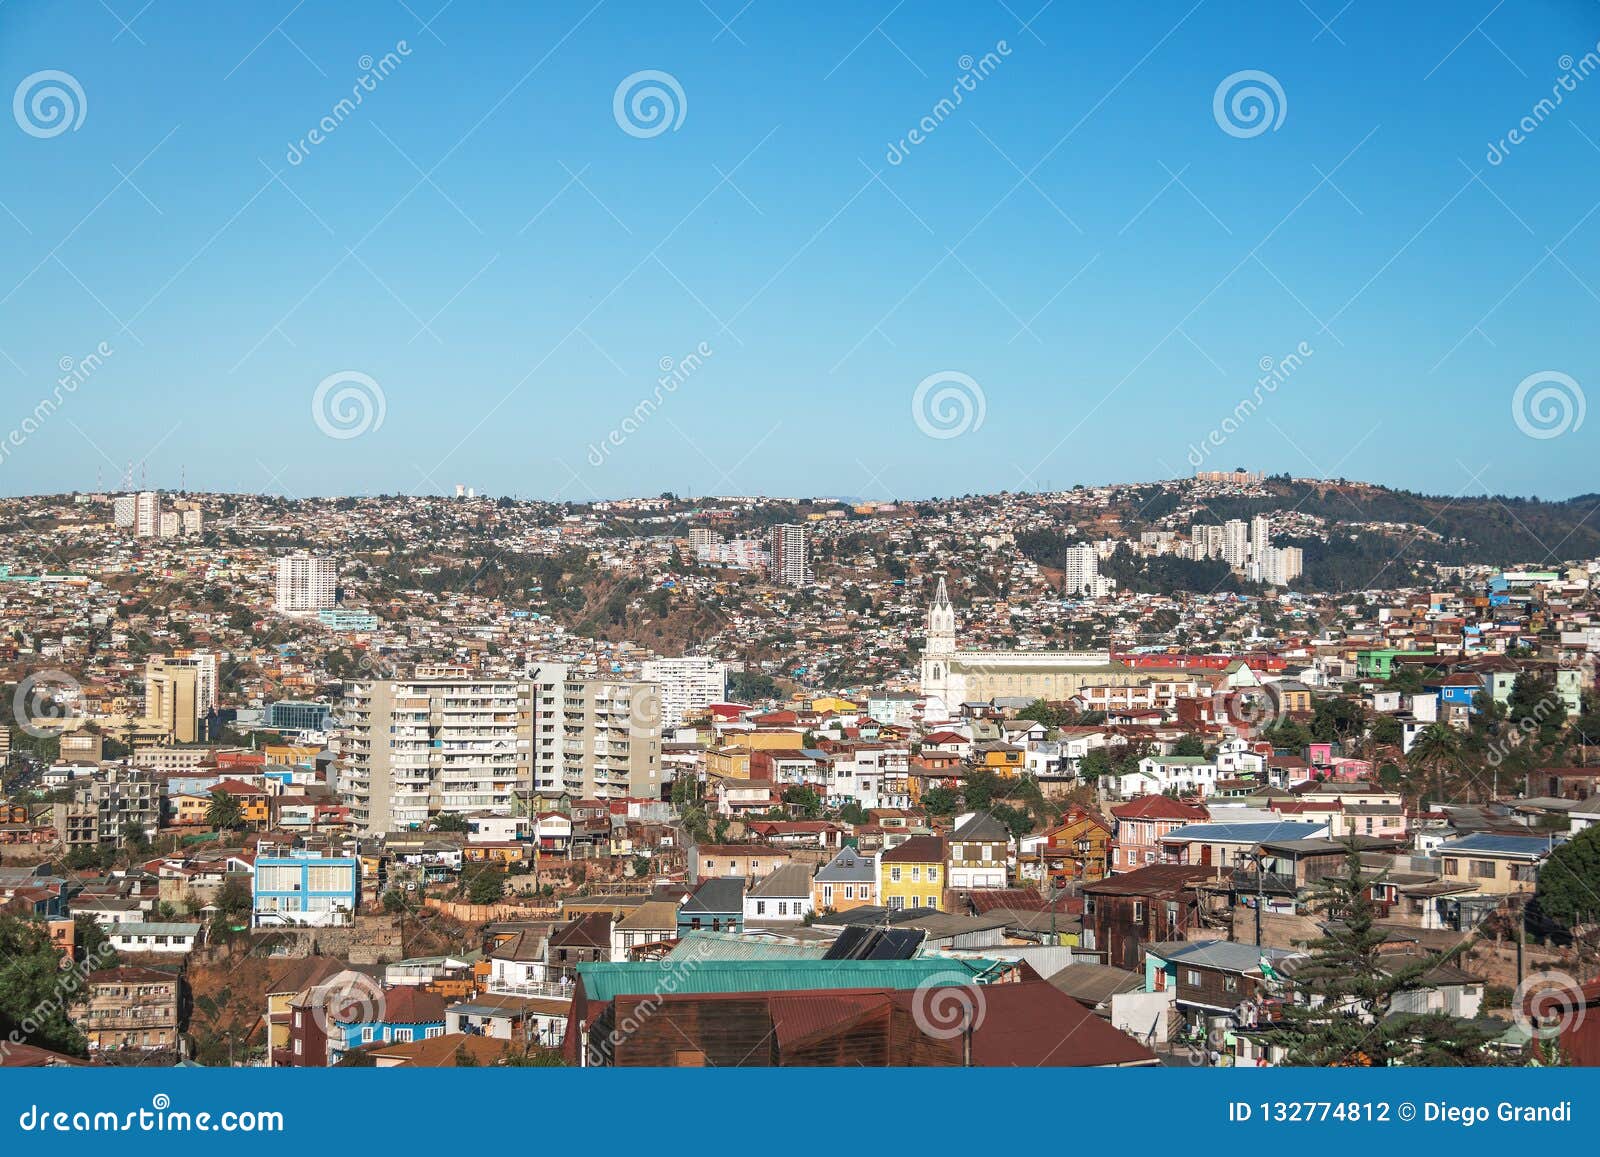 aerial view of valparaiso and las carmelitas church from plaza bismarck at cerro carcel hill - valparaiso, chile